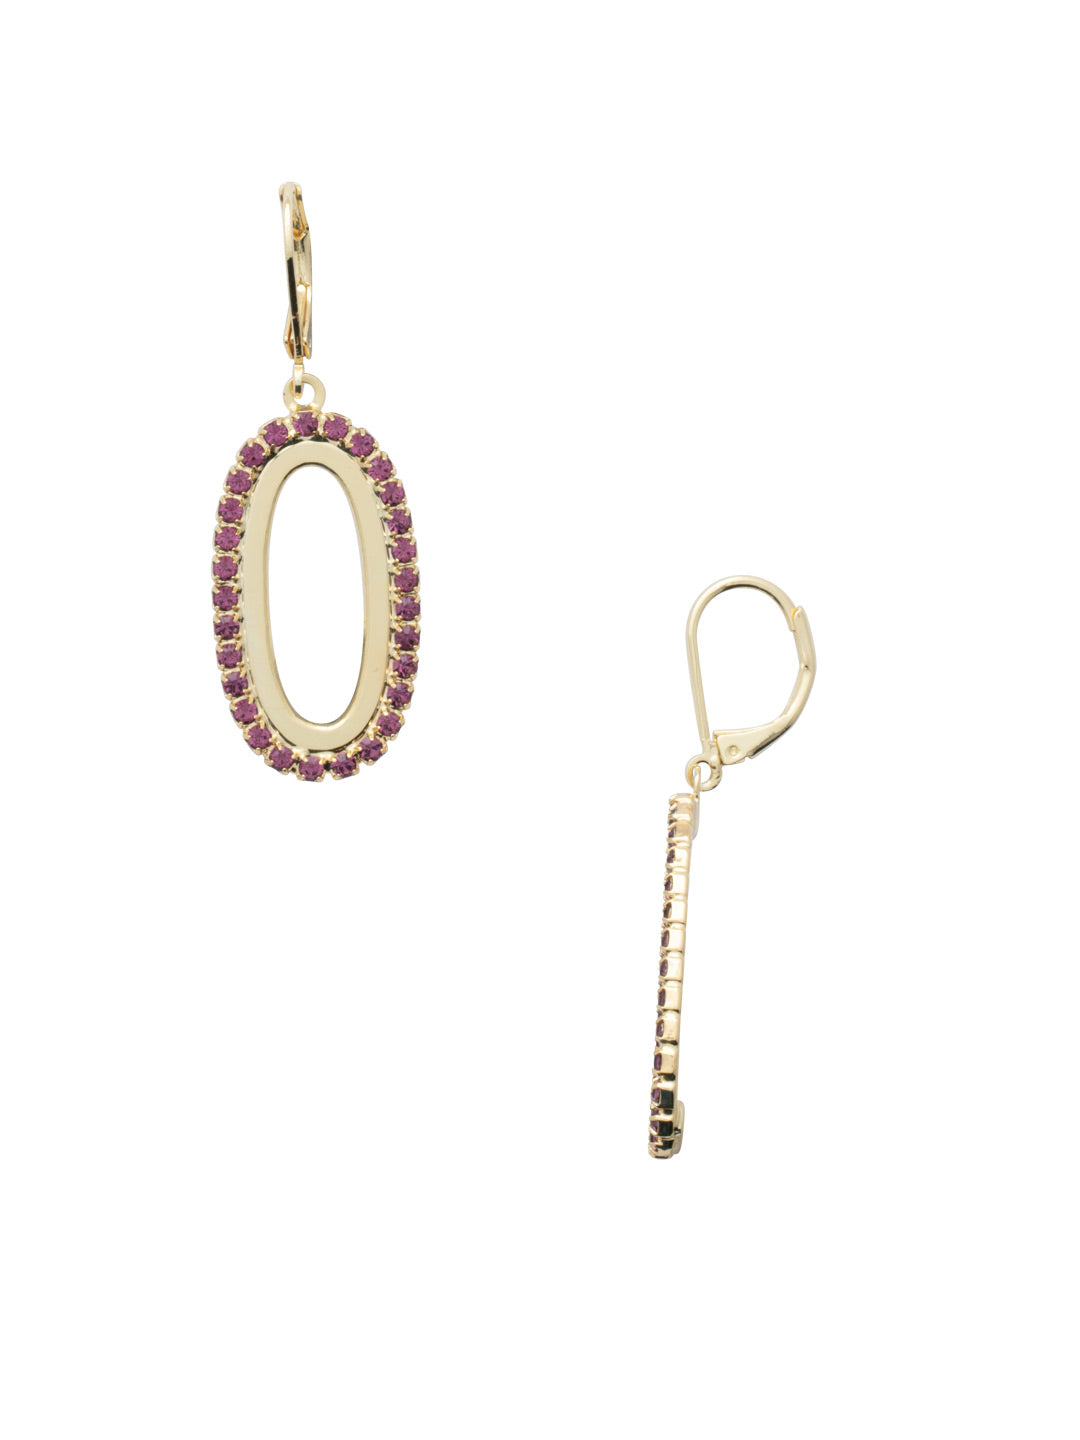 Tori Dangle Earrings - EFL4BGMRL - <p>The Tori Dangle Earrings feature a chunky rhinestone embellished chain link on a lever-back French wire. From Sorrelli's Merlot collection in our Bright Gold-tone finish.</p>